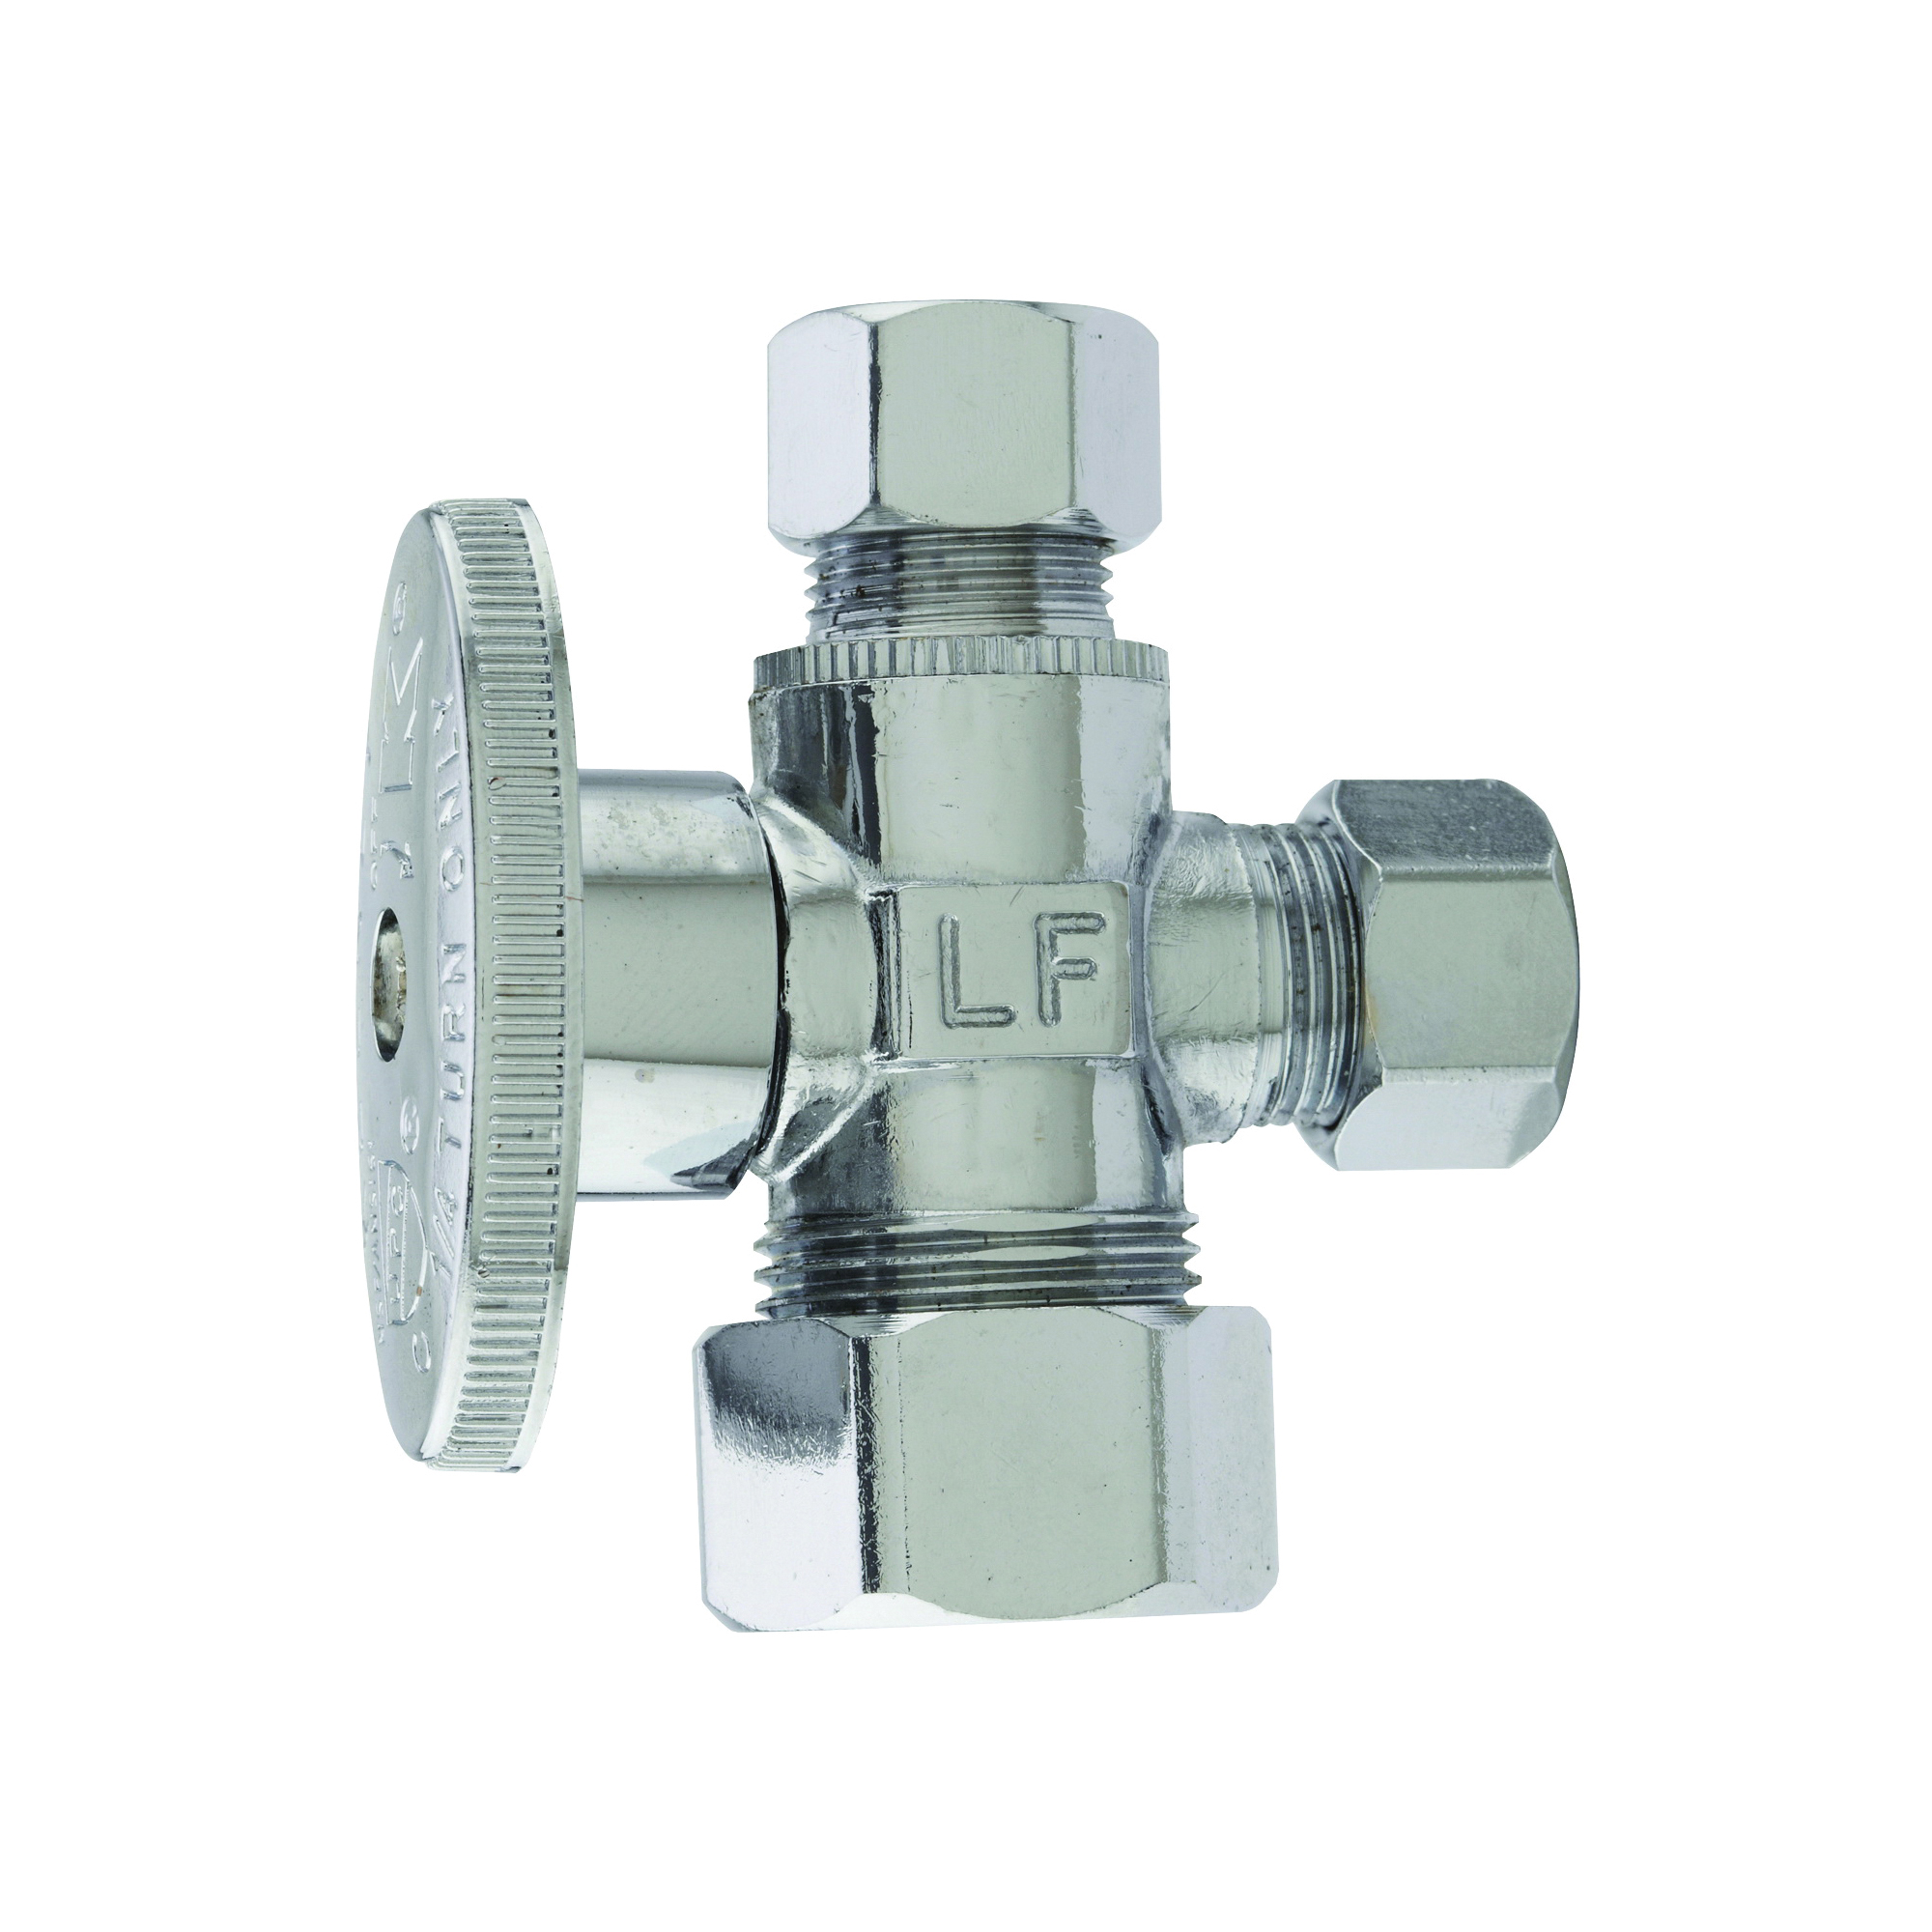 PP20115LF Stop Valve, 5/8 x 3/8 x 3/8 in Connection, Compression, 400 psi Pressure, Brass Body